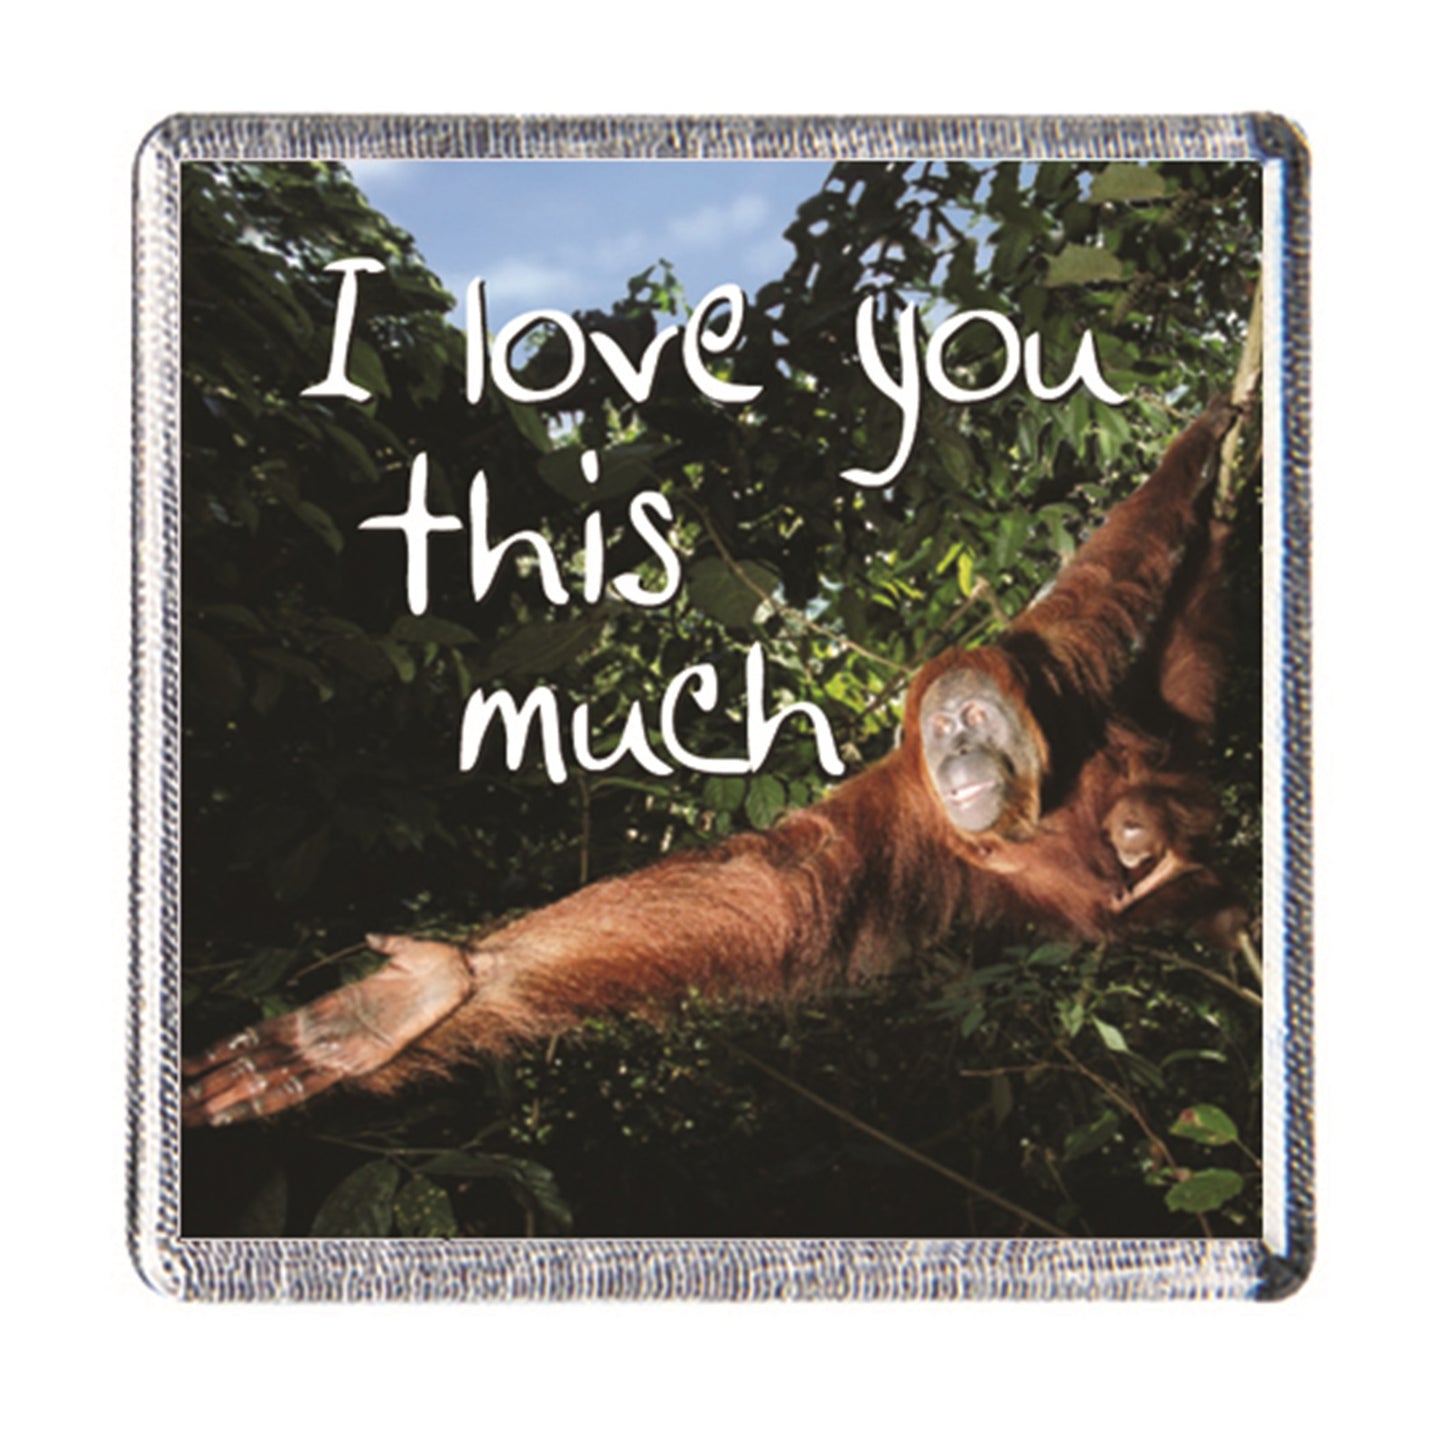 Fridge magnet "I love you this much" by History & Heraldry